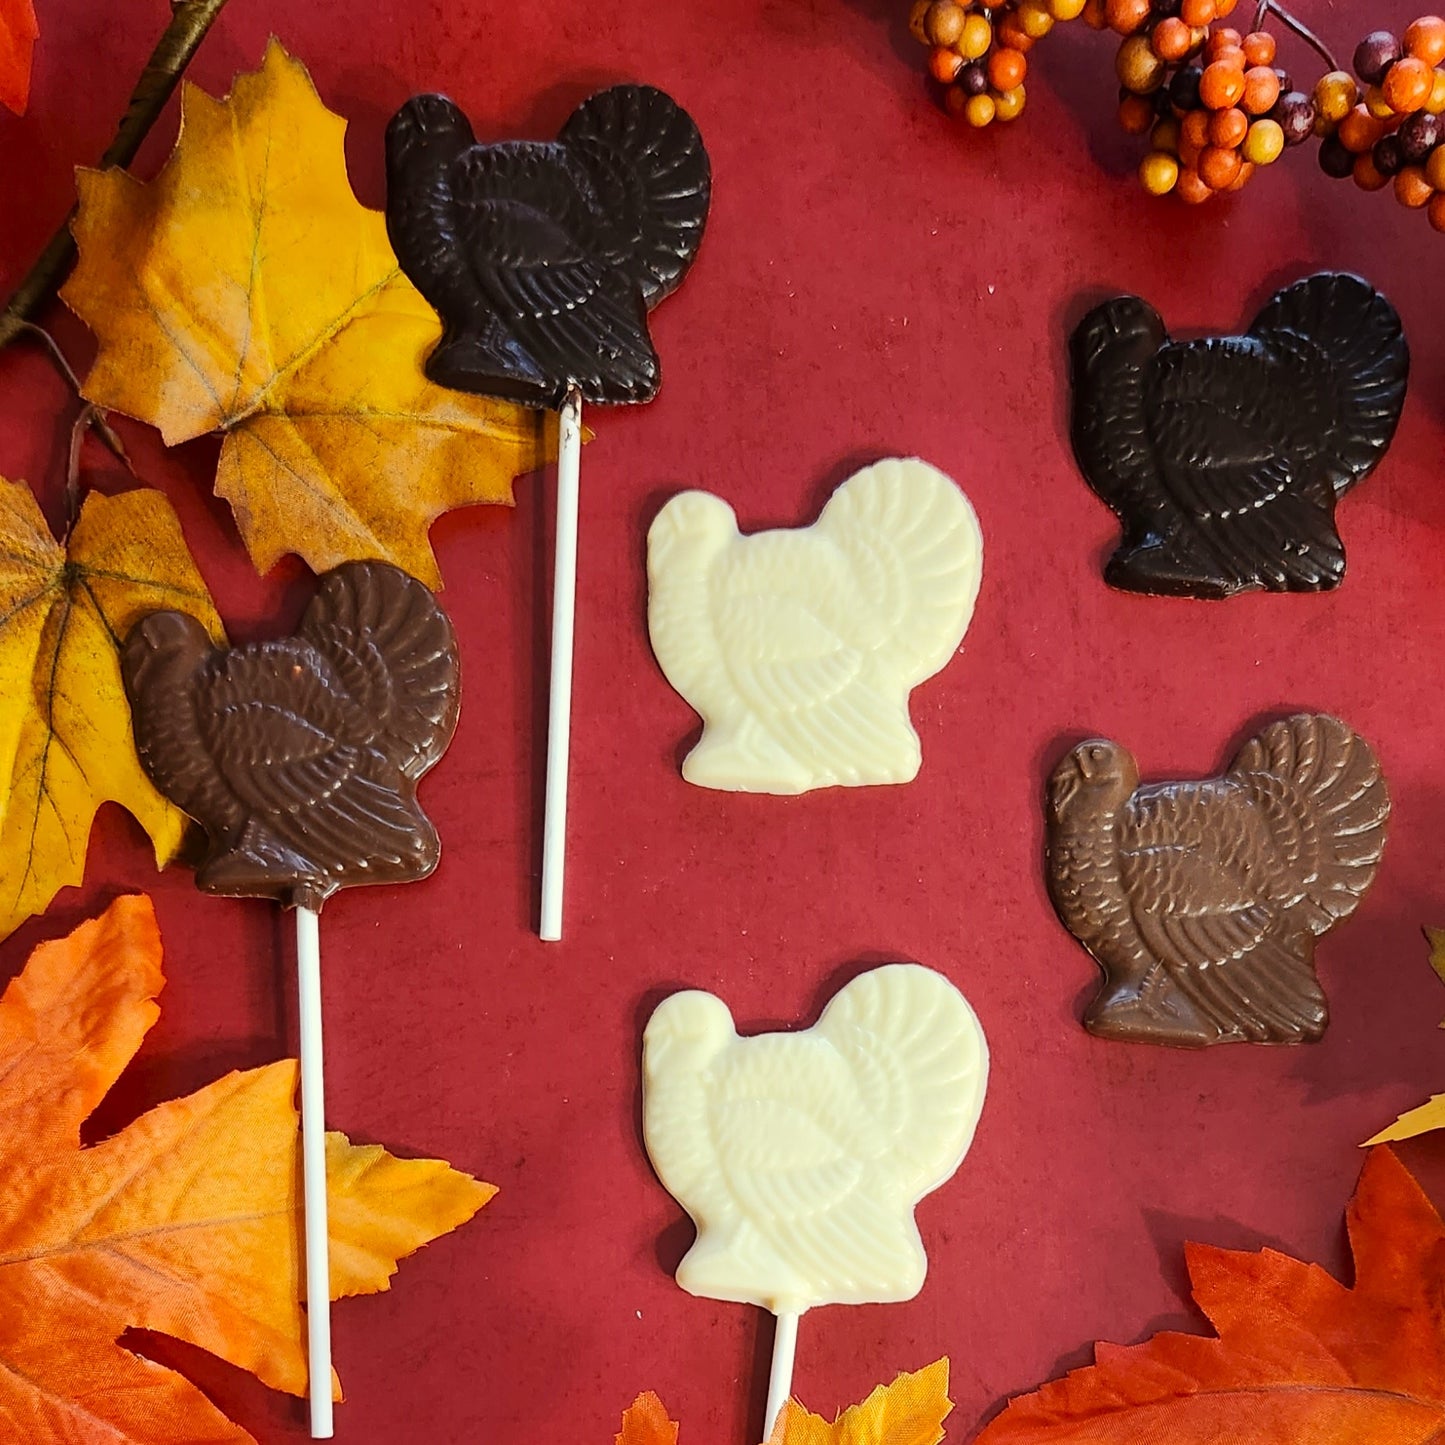 Delight your guests with these cute and delicious Chocolate Turkeys, available in Milk, Dark, and White Chocolate varieties. A perfect addition to your holiday table!